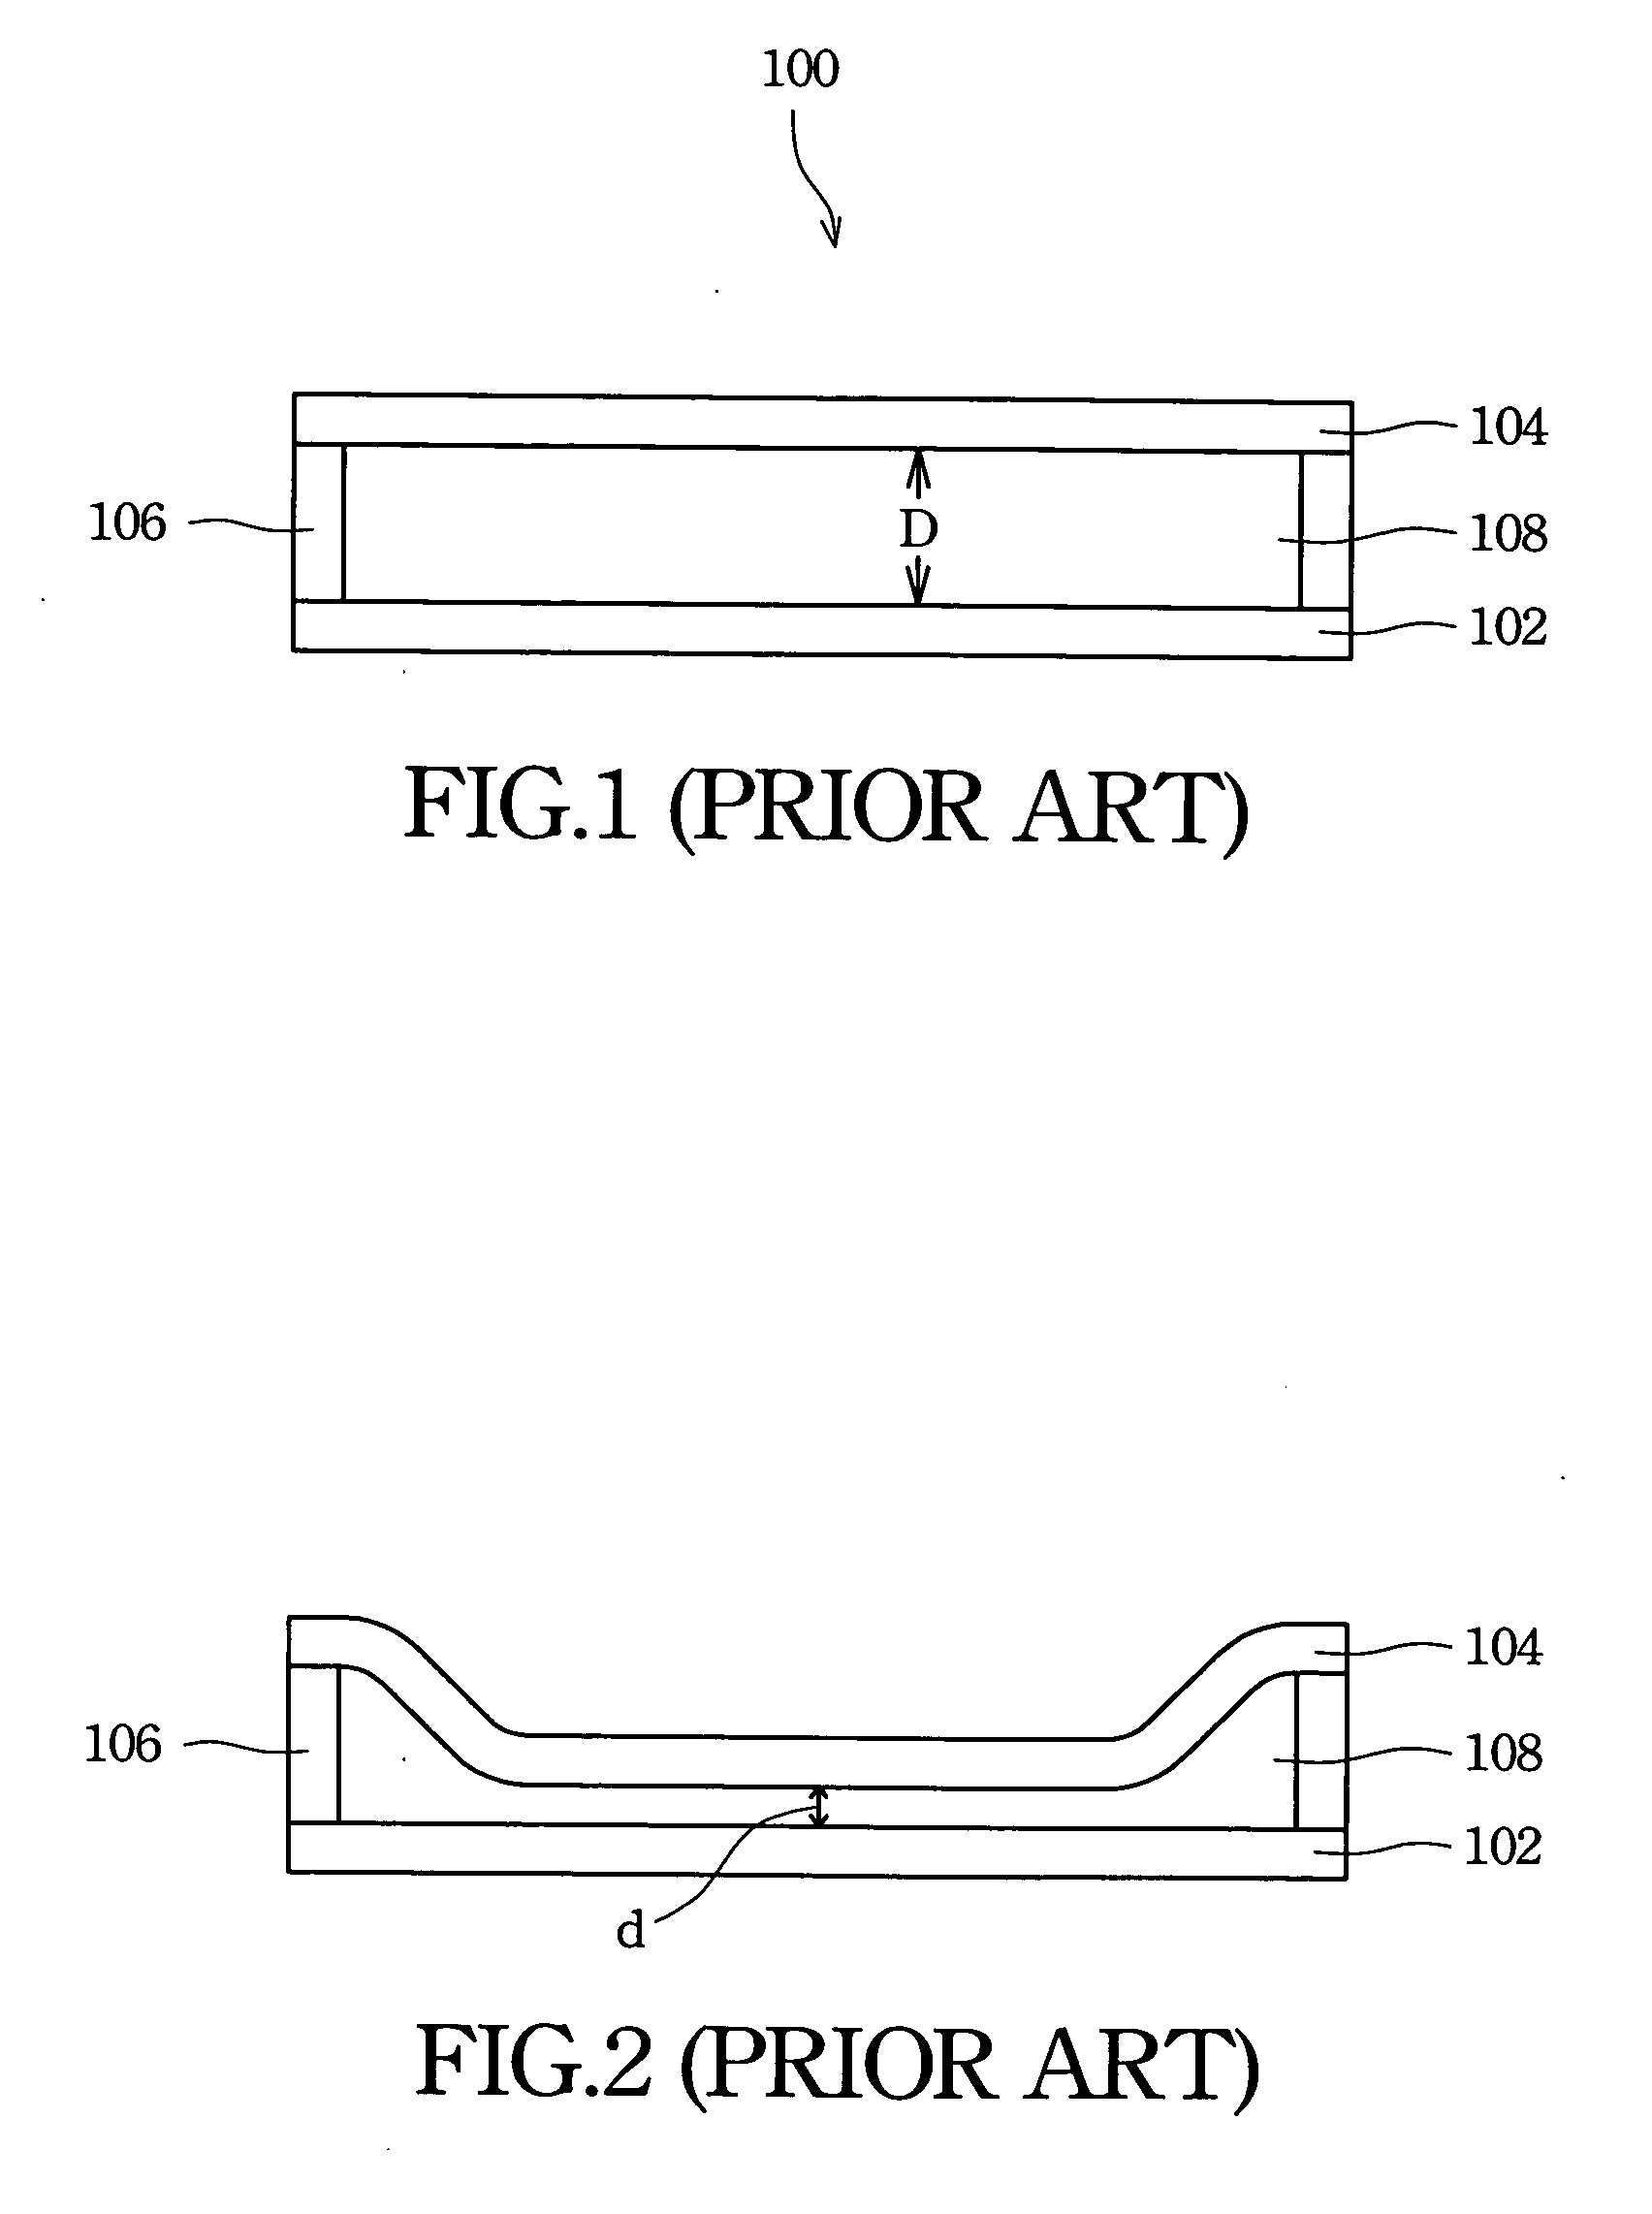 Structure of a micro electro mechanical system and the manufacturing method thereof